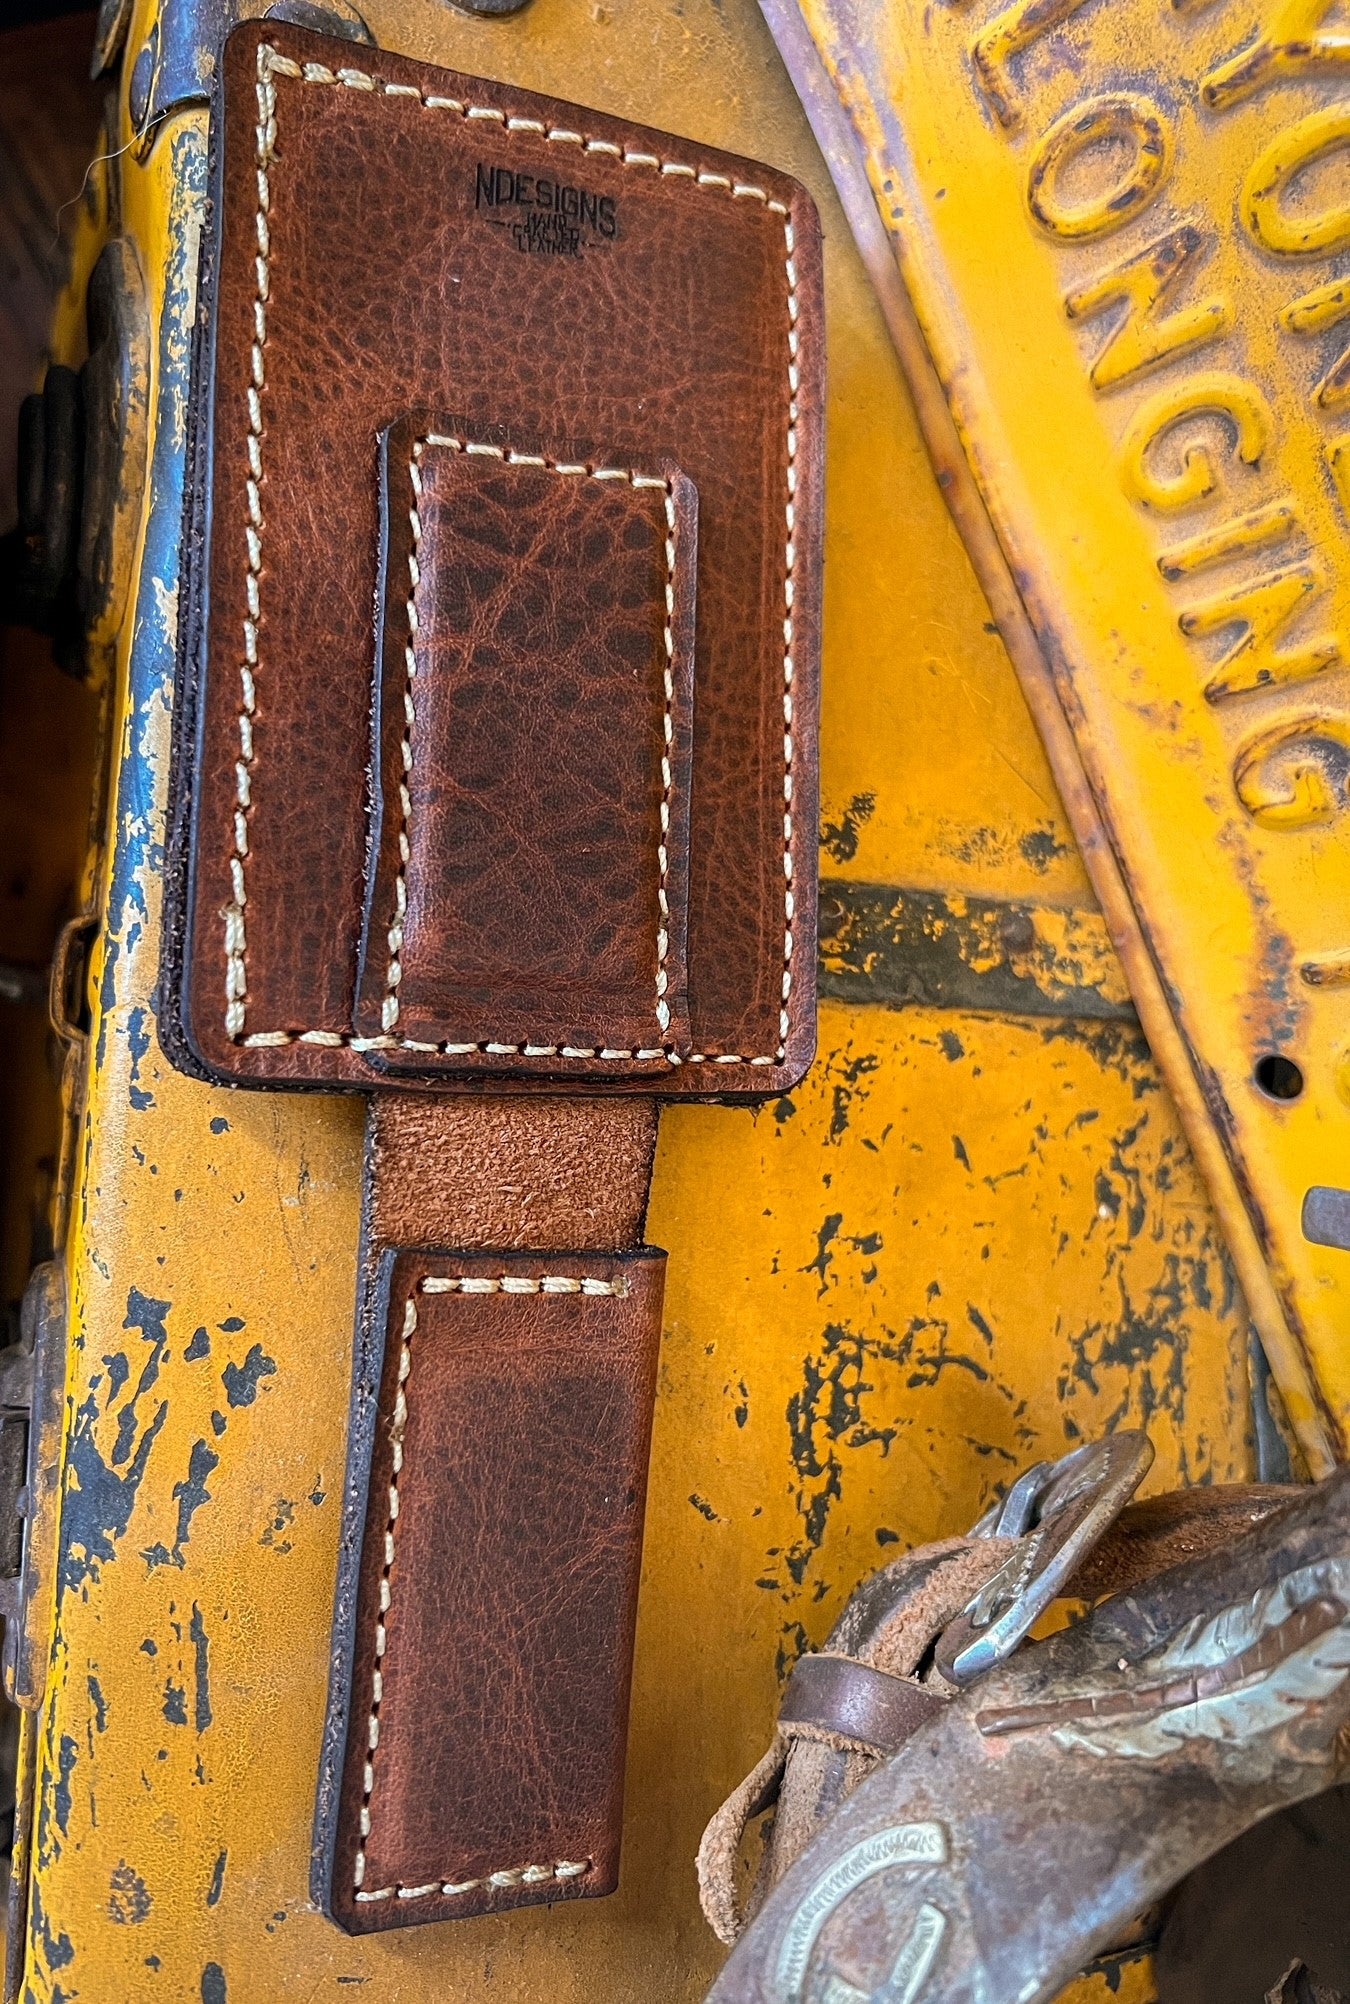 The Thrifty Cowhand Magnetic Wallet